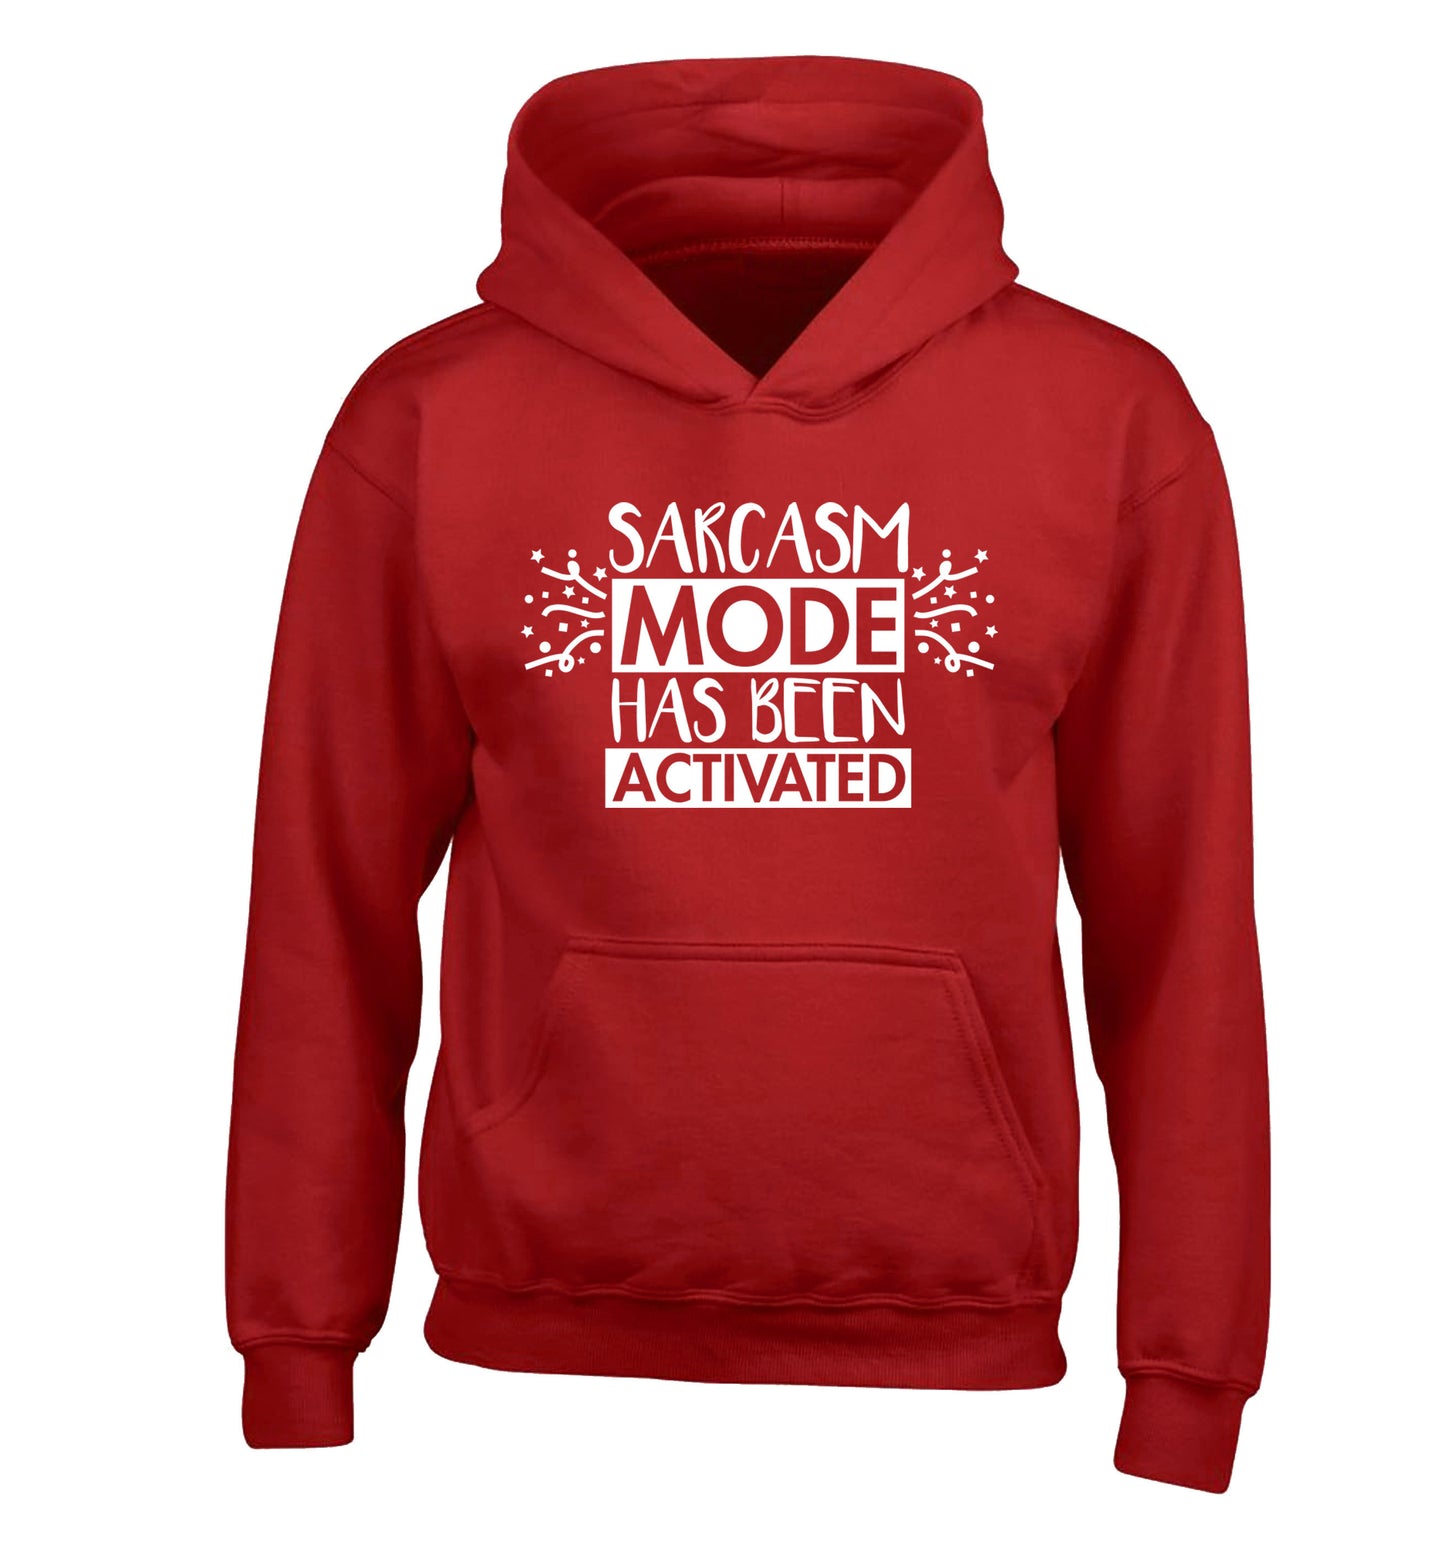 Sarcarsm mode has been activated children's red hoodie 12-14 Years